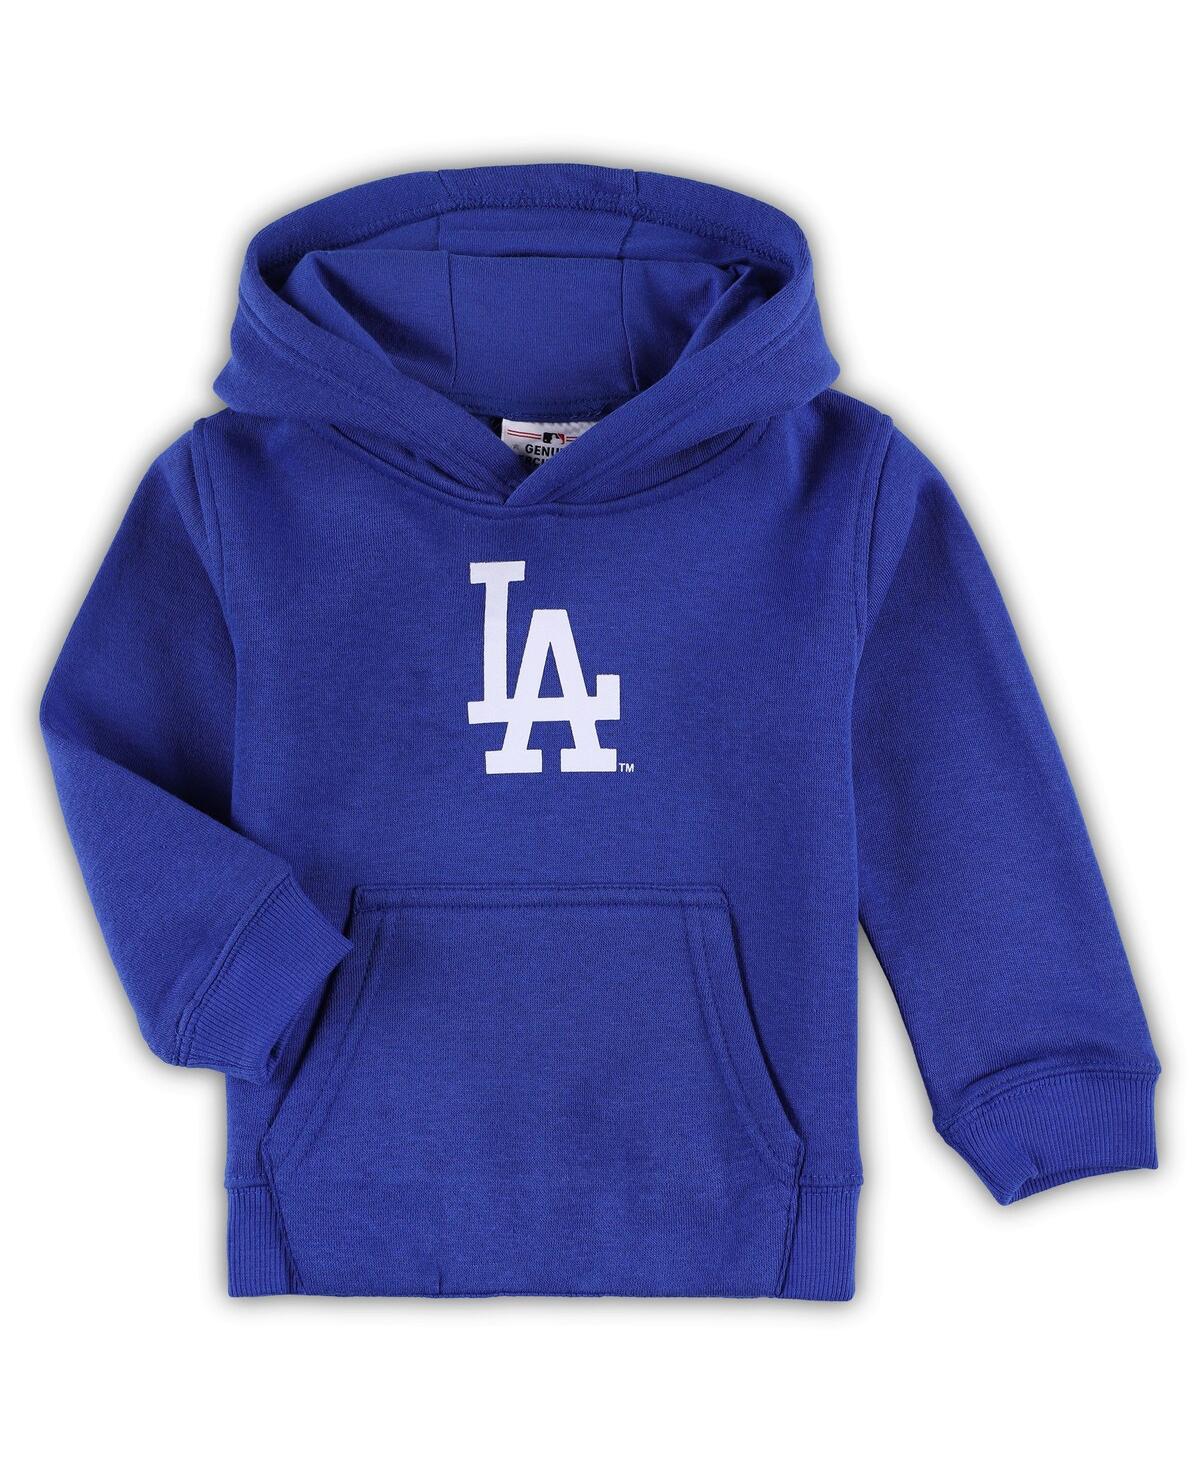 Outerstuff Babies' Toddler Boys And Girls Royal Los Angeles Dodgers Team Primary Logo Fleece Pullover Hoodie